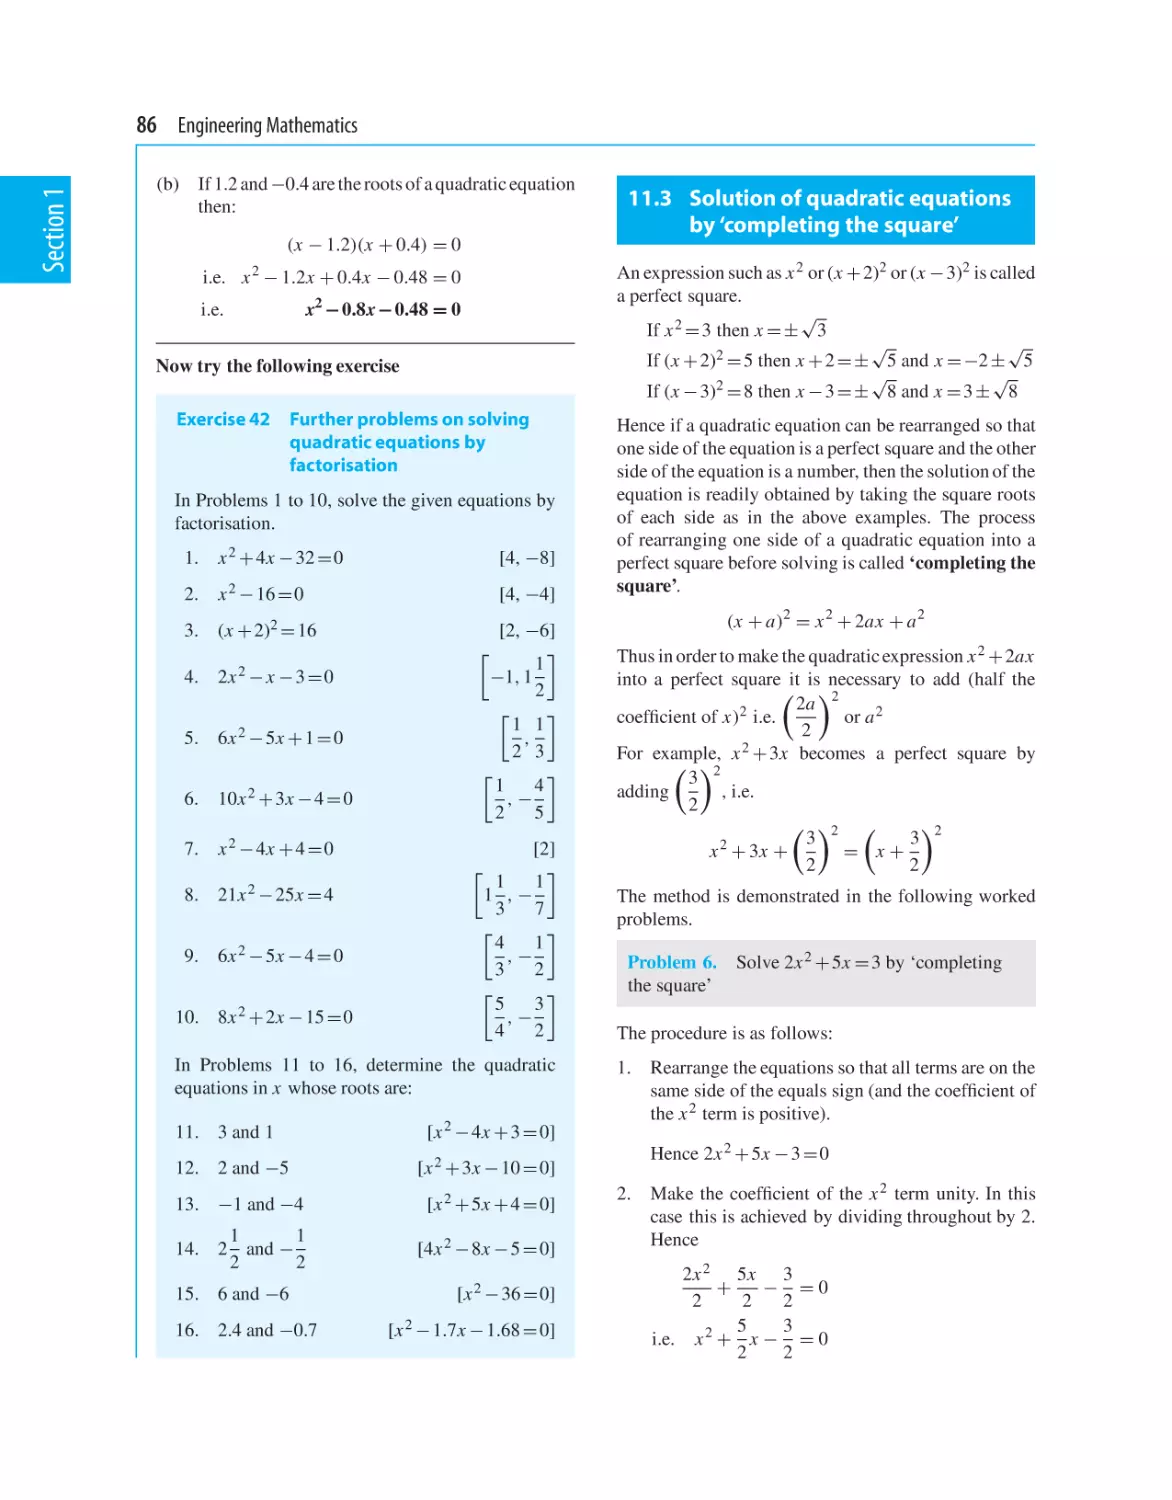 11.3 Solution of quadratic equations by ‘completing the square’